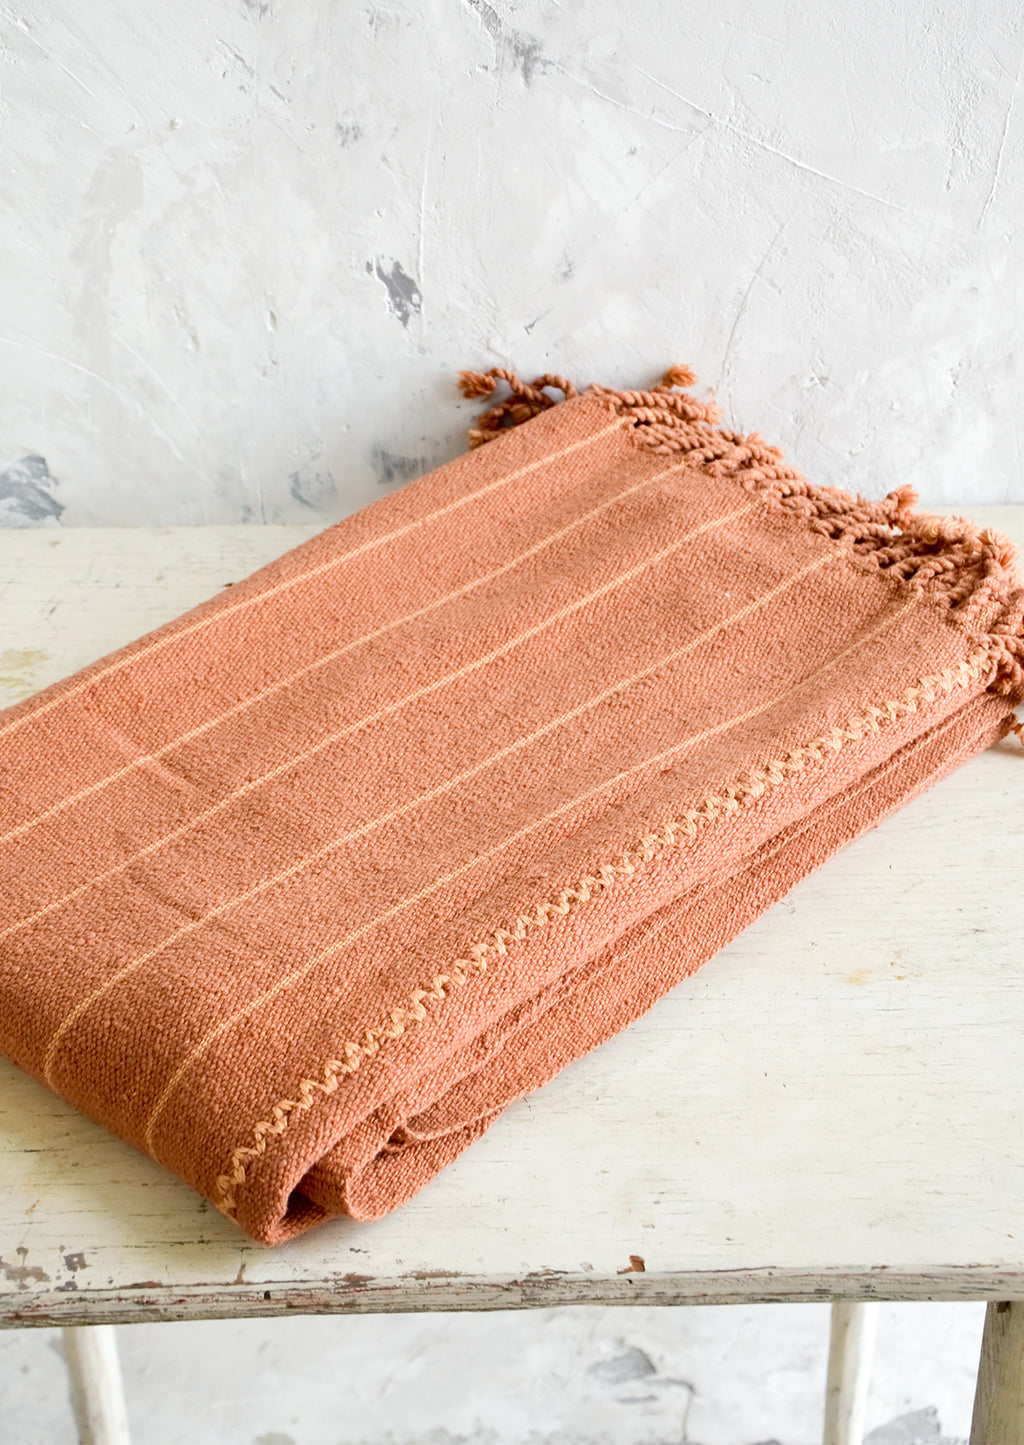 Terracotta / Peach: Natural woven cotton throw in peach and terracotta stripes with twisted fringe edge